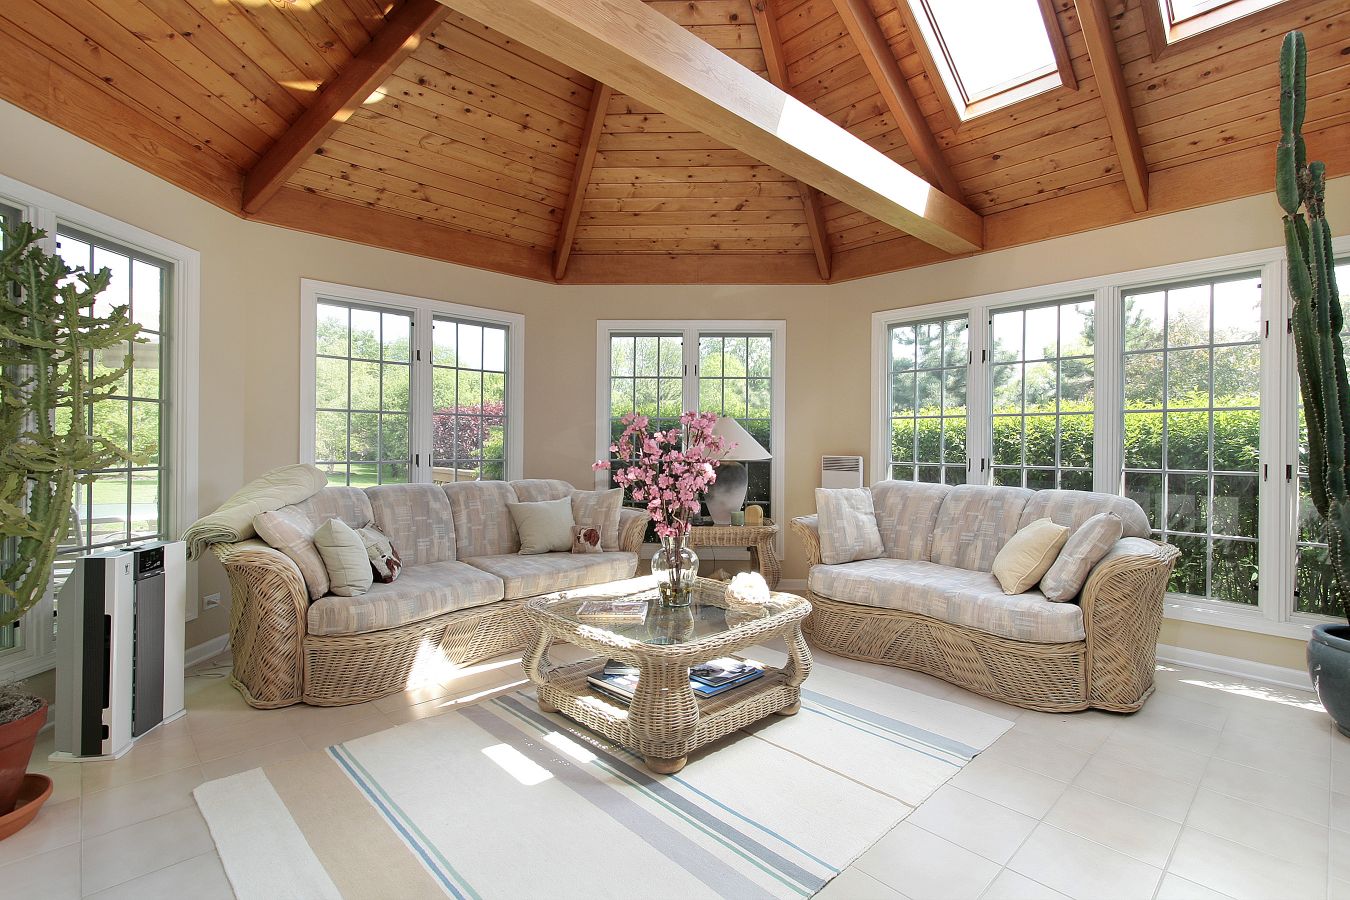 Give Your Sunroom a New Look